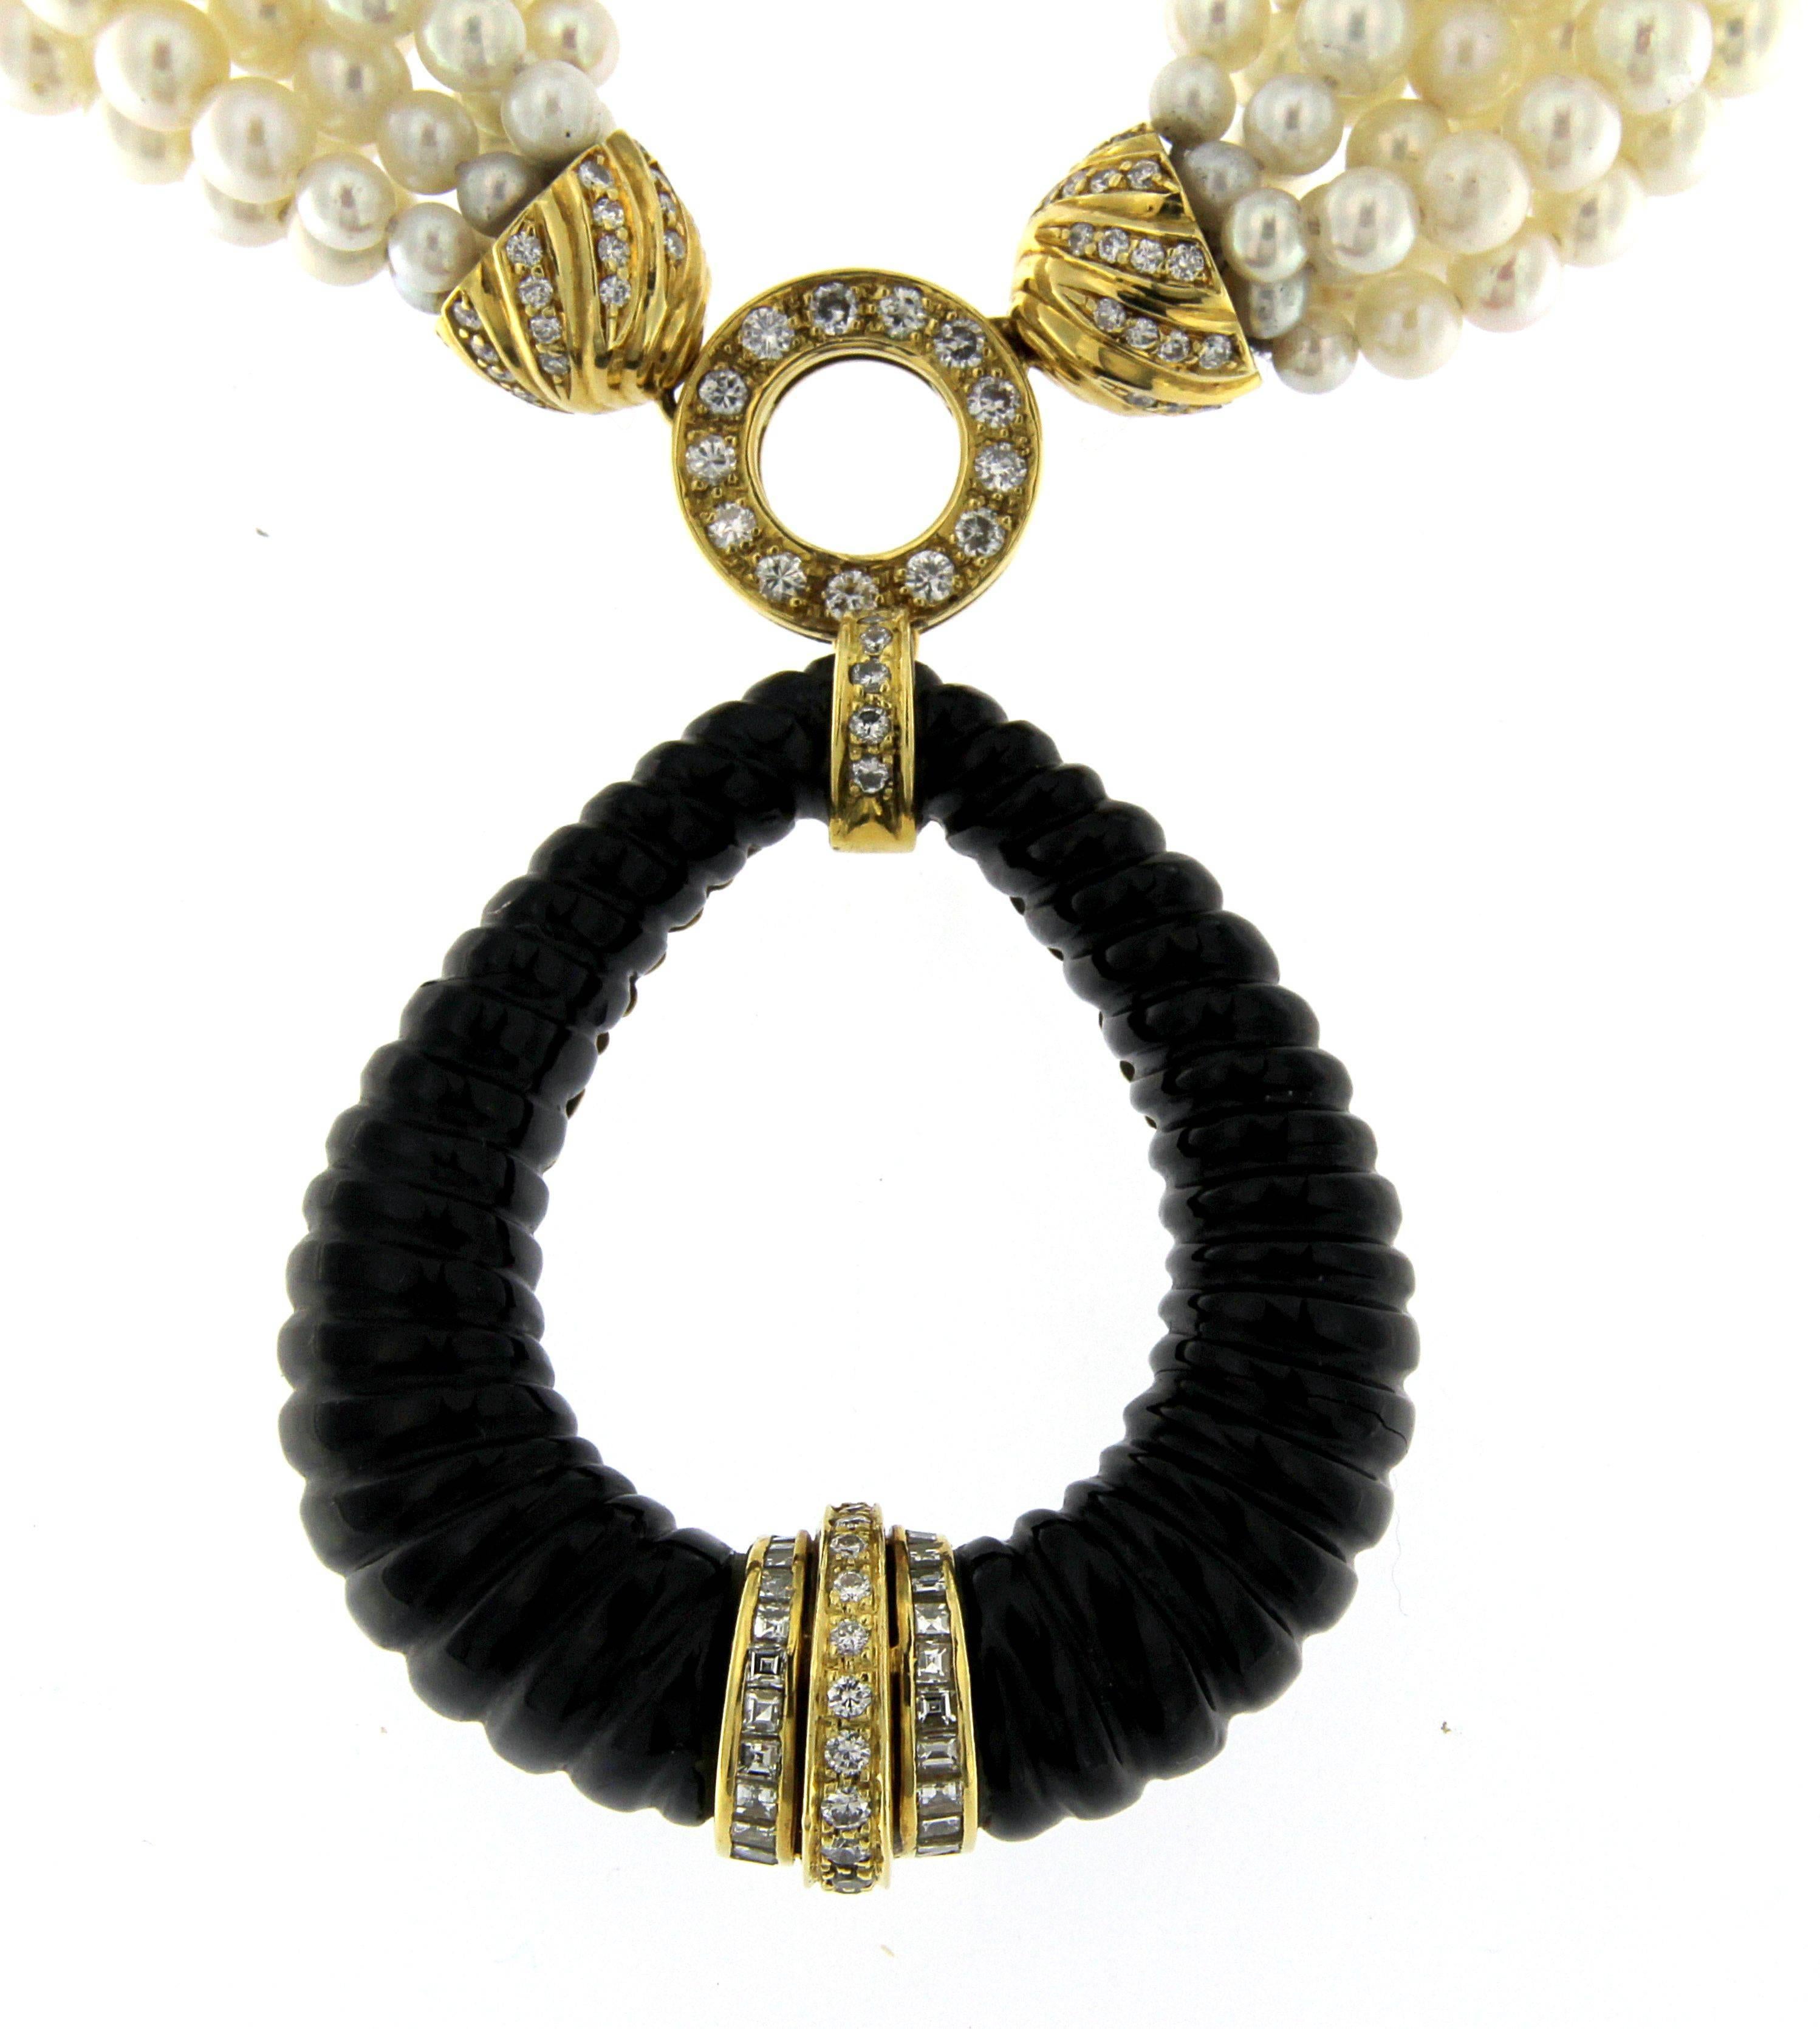 Very sophisticated necklace original from the 60's.
White degrading south see pearls
cut onyx elements on a unique design
All linked by some yellow 18 kt gold enriched elements
18 kt gold weight gr 87,40
Diamonds color HG clarity VVS1/2 ct 7,67
the